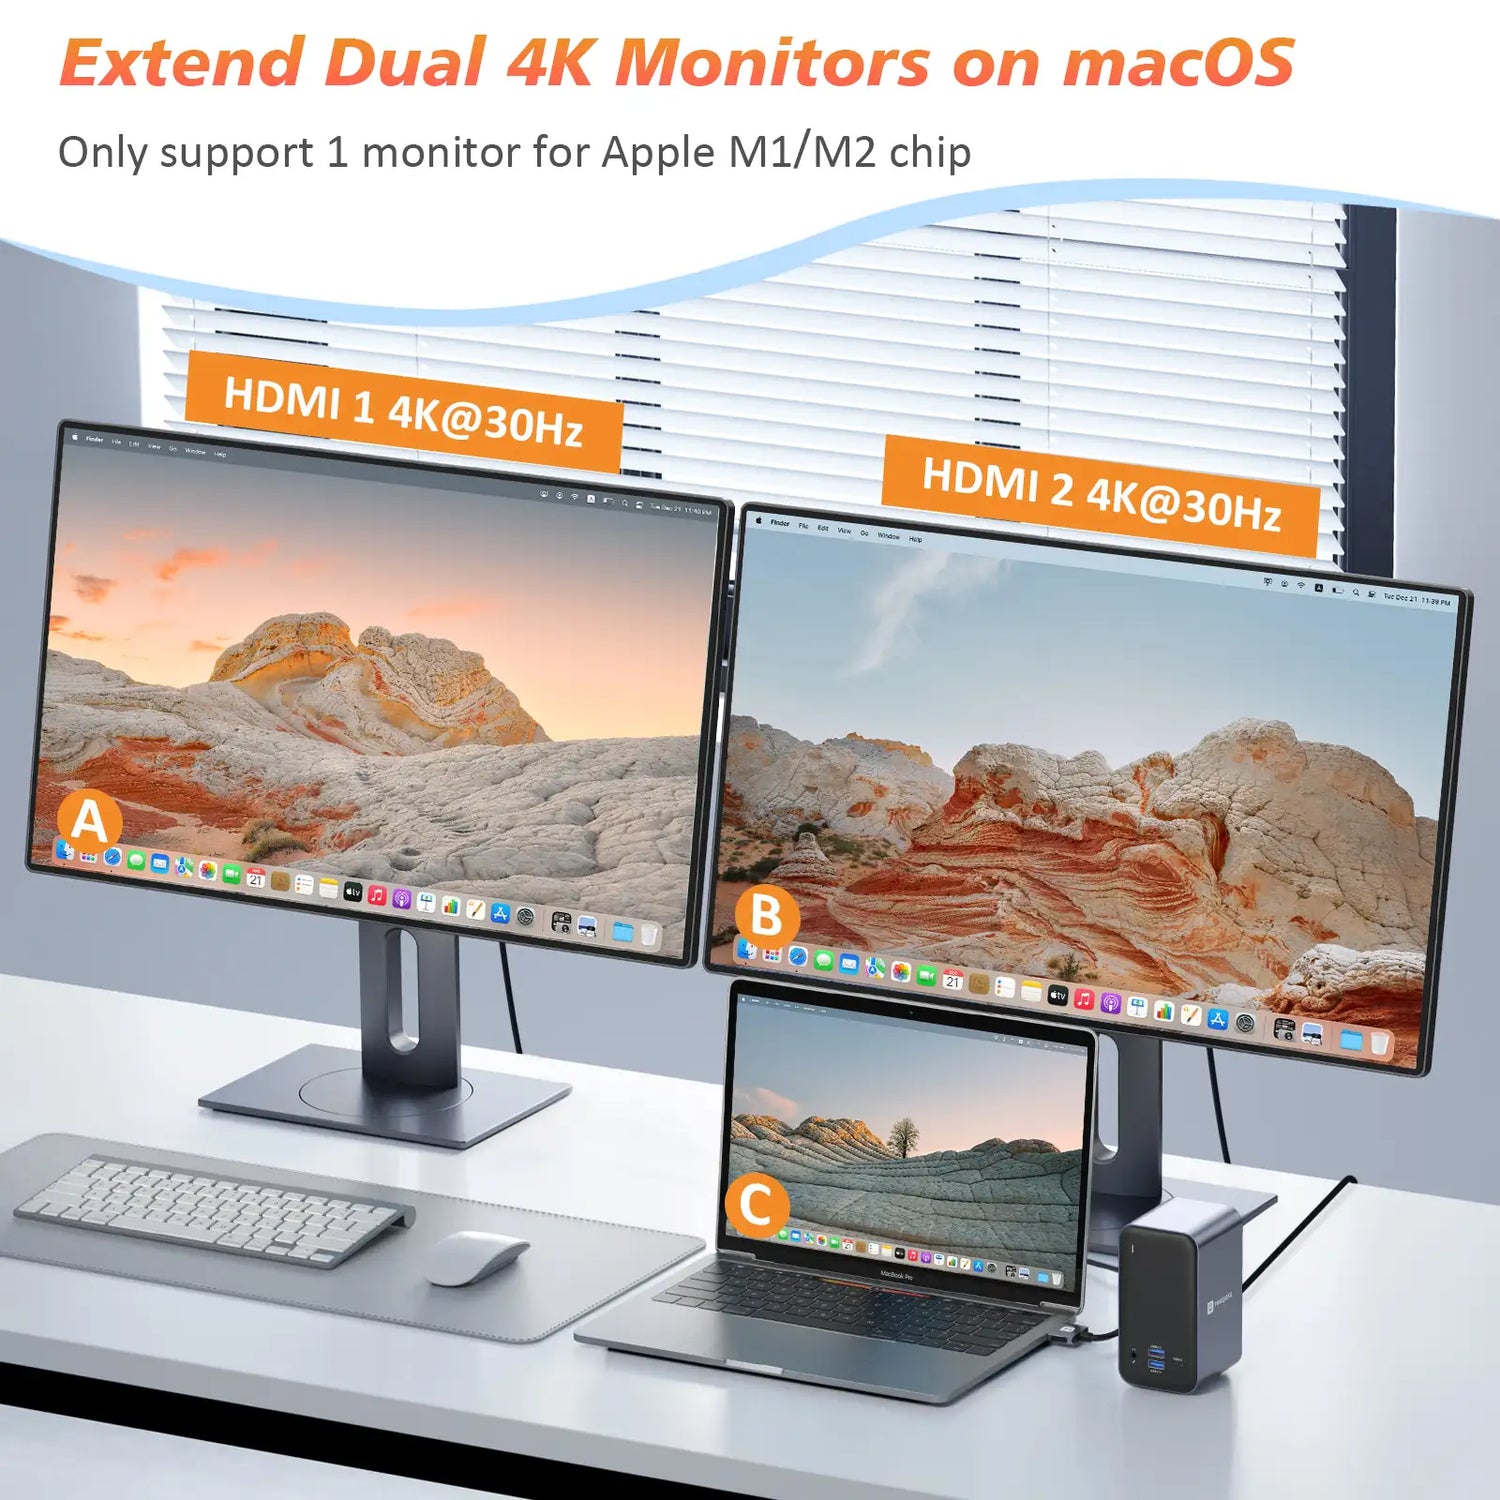 Tonenone UDS009 MacBook Docking Station Dual Extended Monitor on macOS